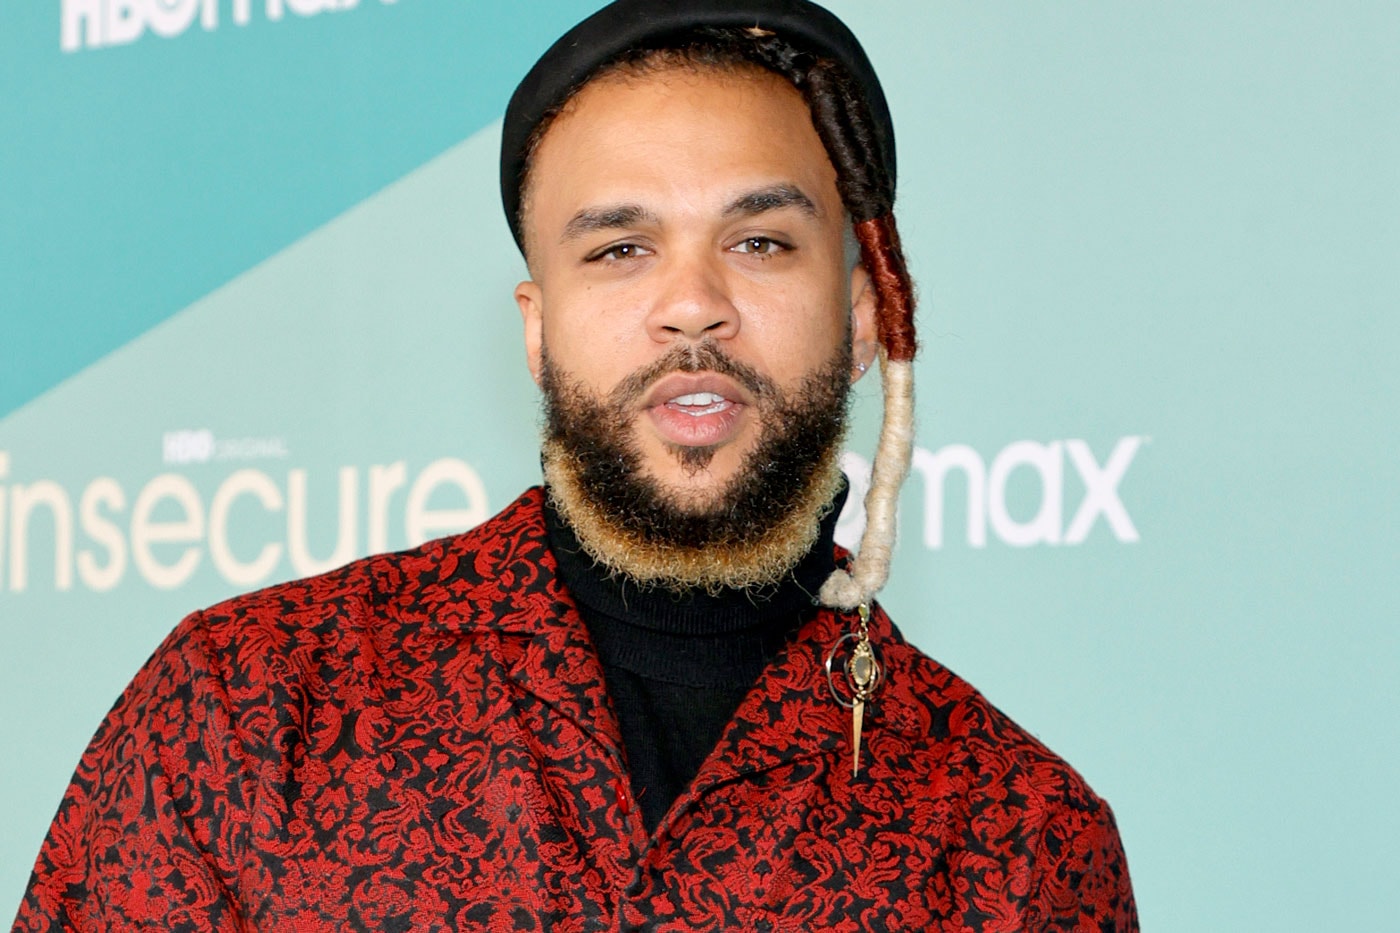 Grammy Nominee Jidenna Drops off Two New Songs